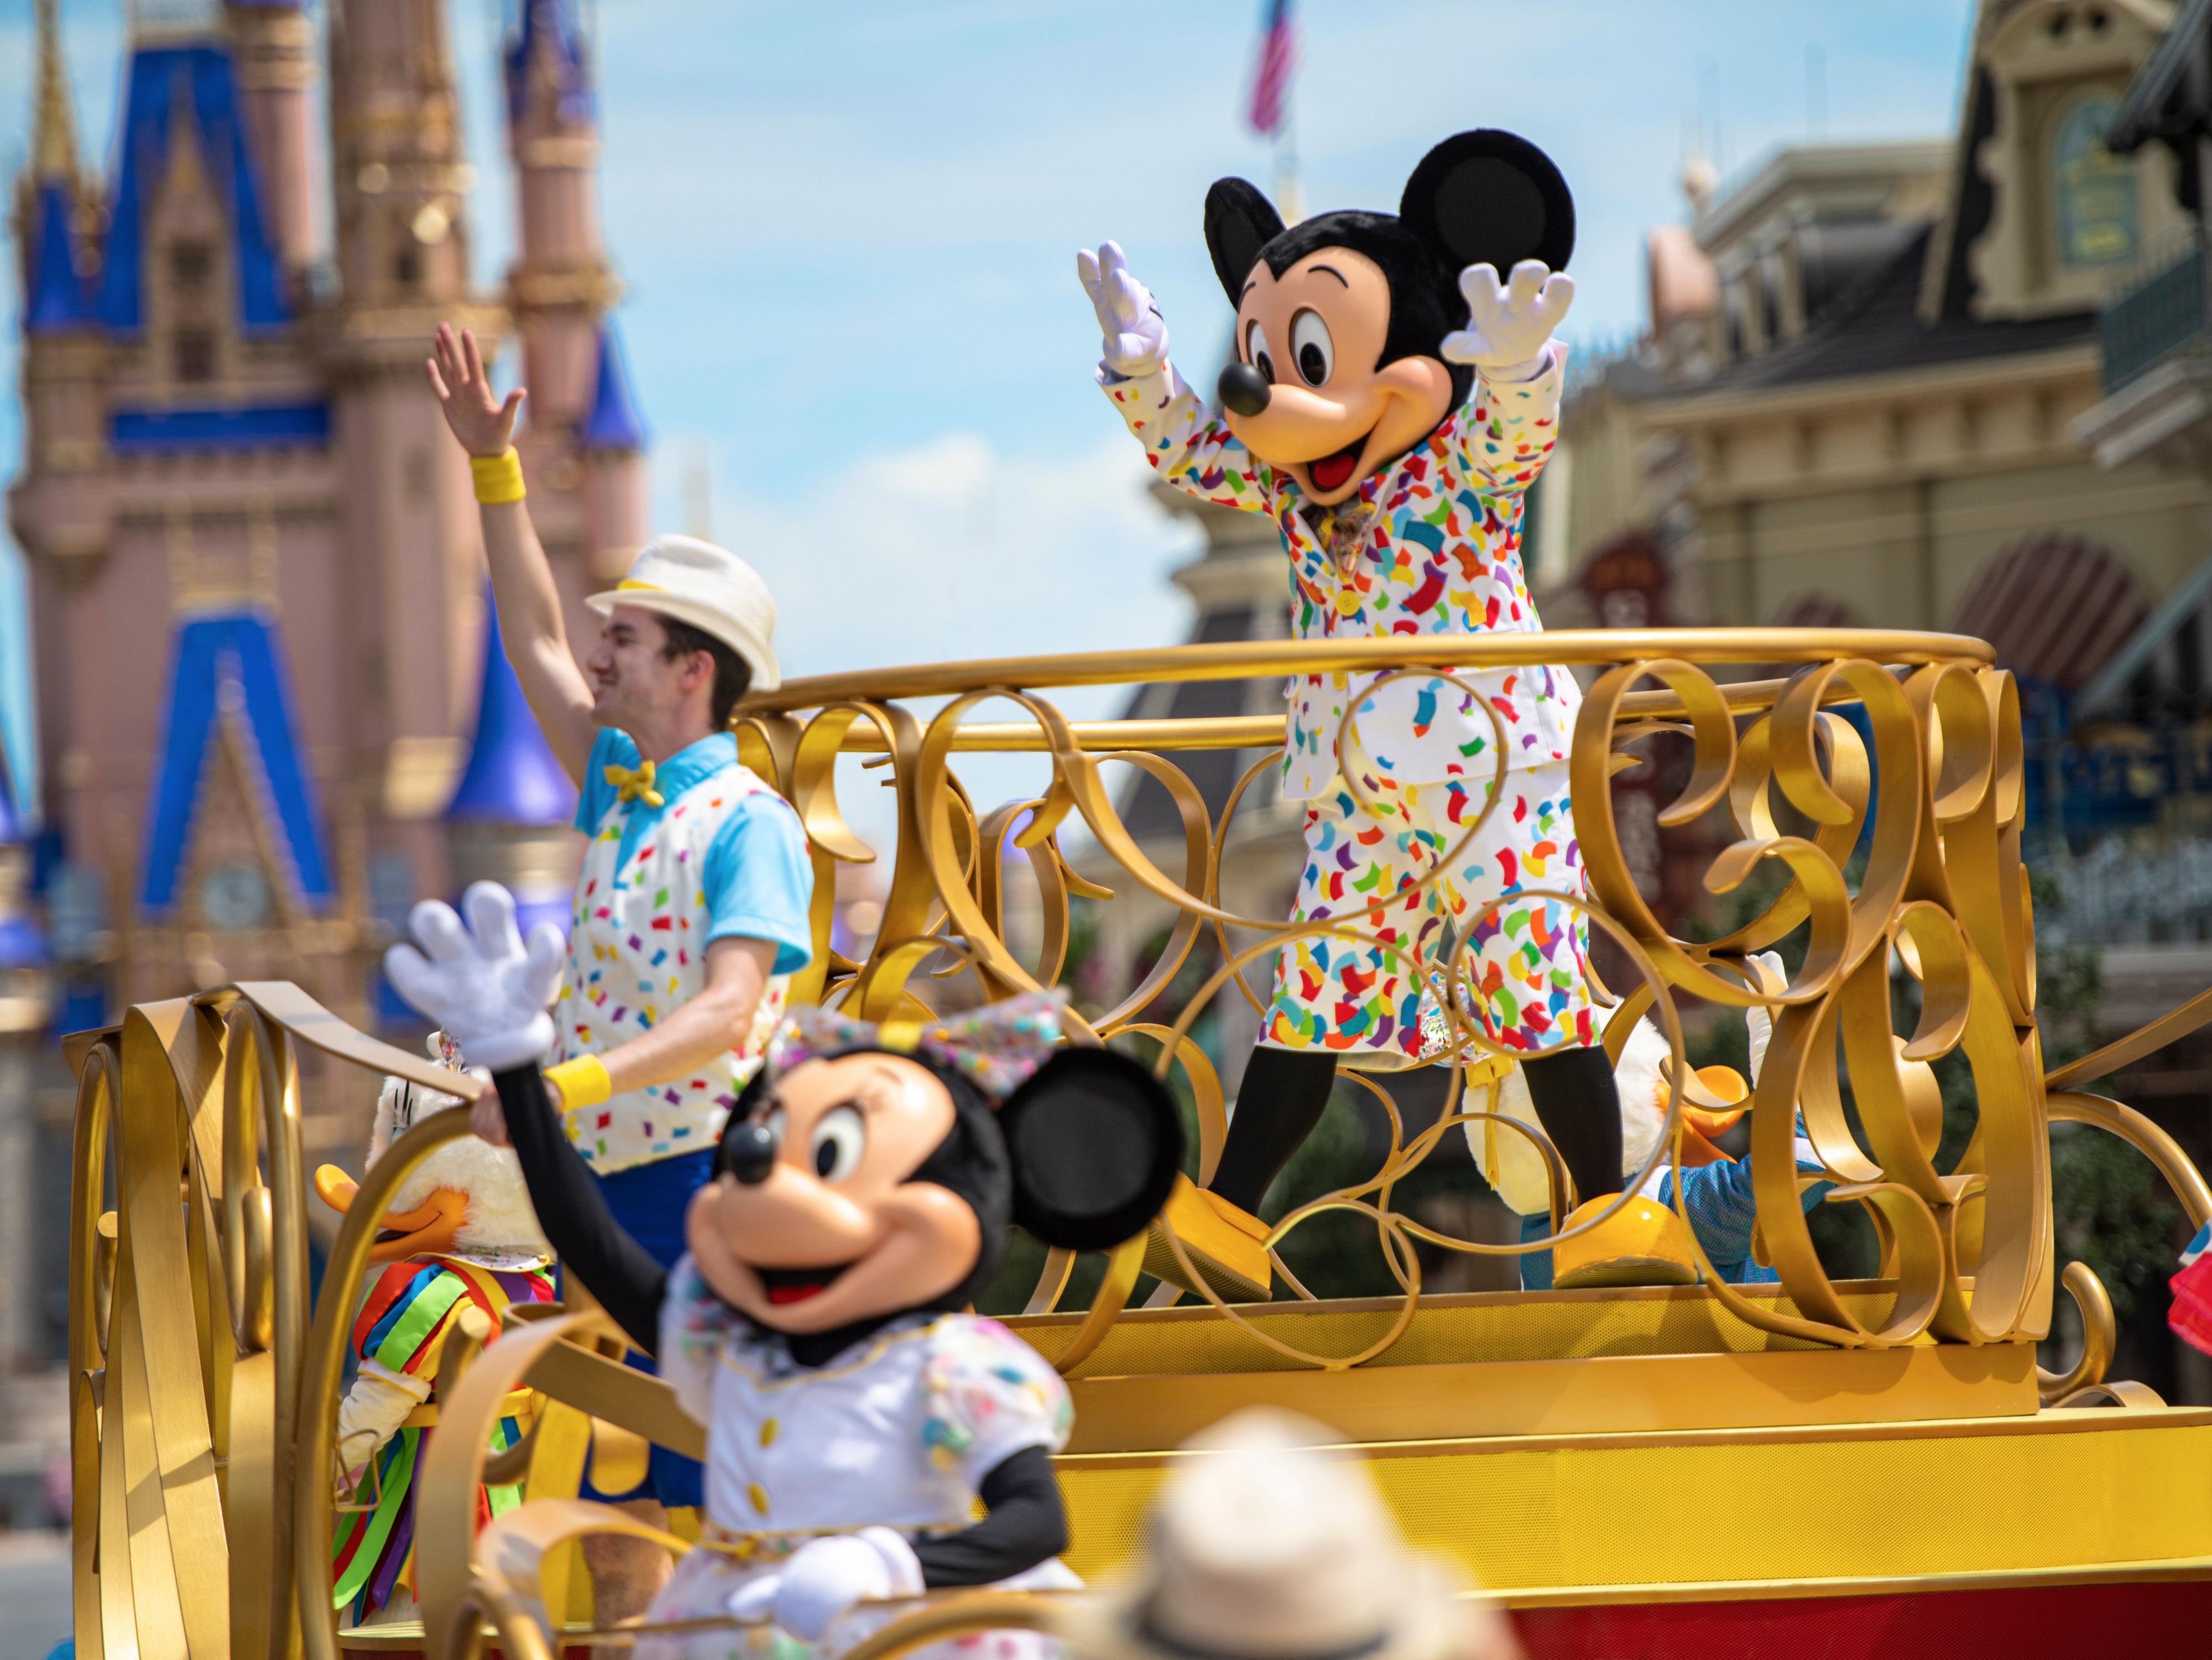 As a Walt Disney World Good Neighbor® Hotel, situated just minutes from the Walt Disney World® Main Gate, we provide a complimentary shuttle service to all four Disney theme parks: Magic Kingdom, Animal Kingdom, Hollywood Studios, and EPCOT. Explore our Disney World packages and plan your next unforgettable family getaway.